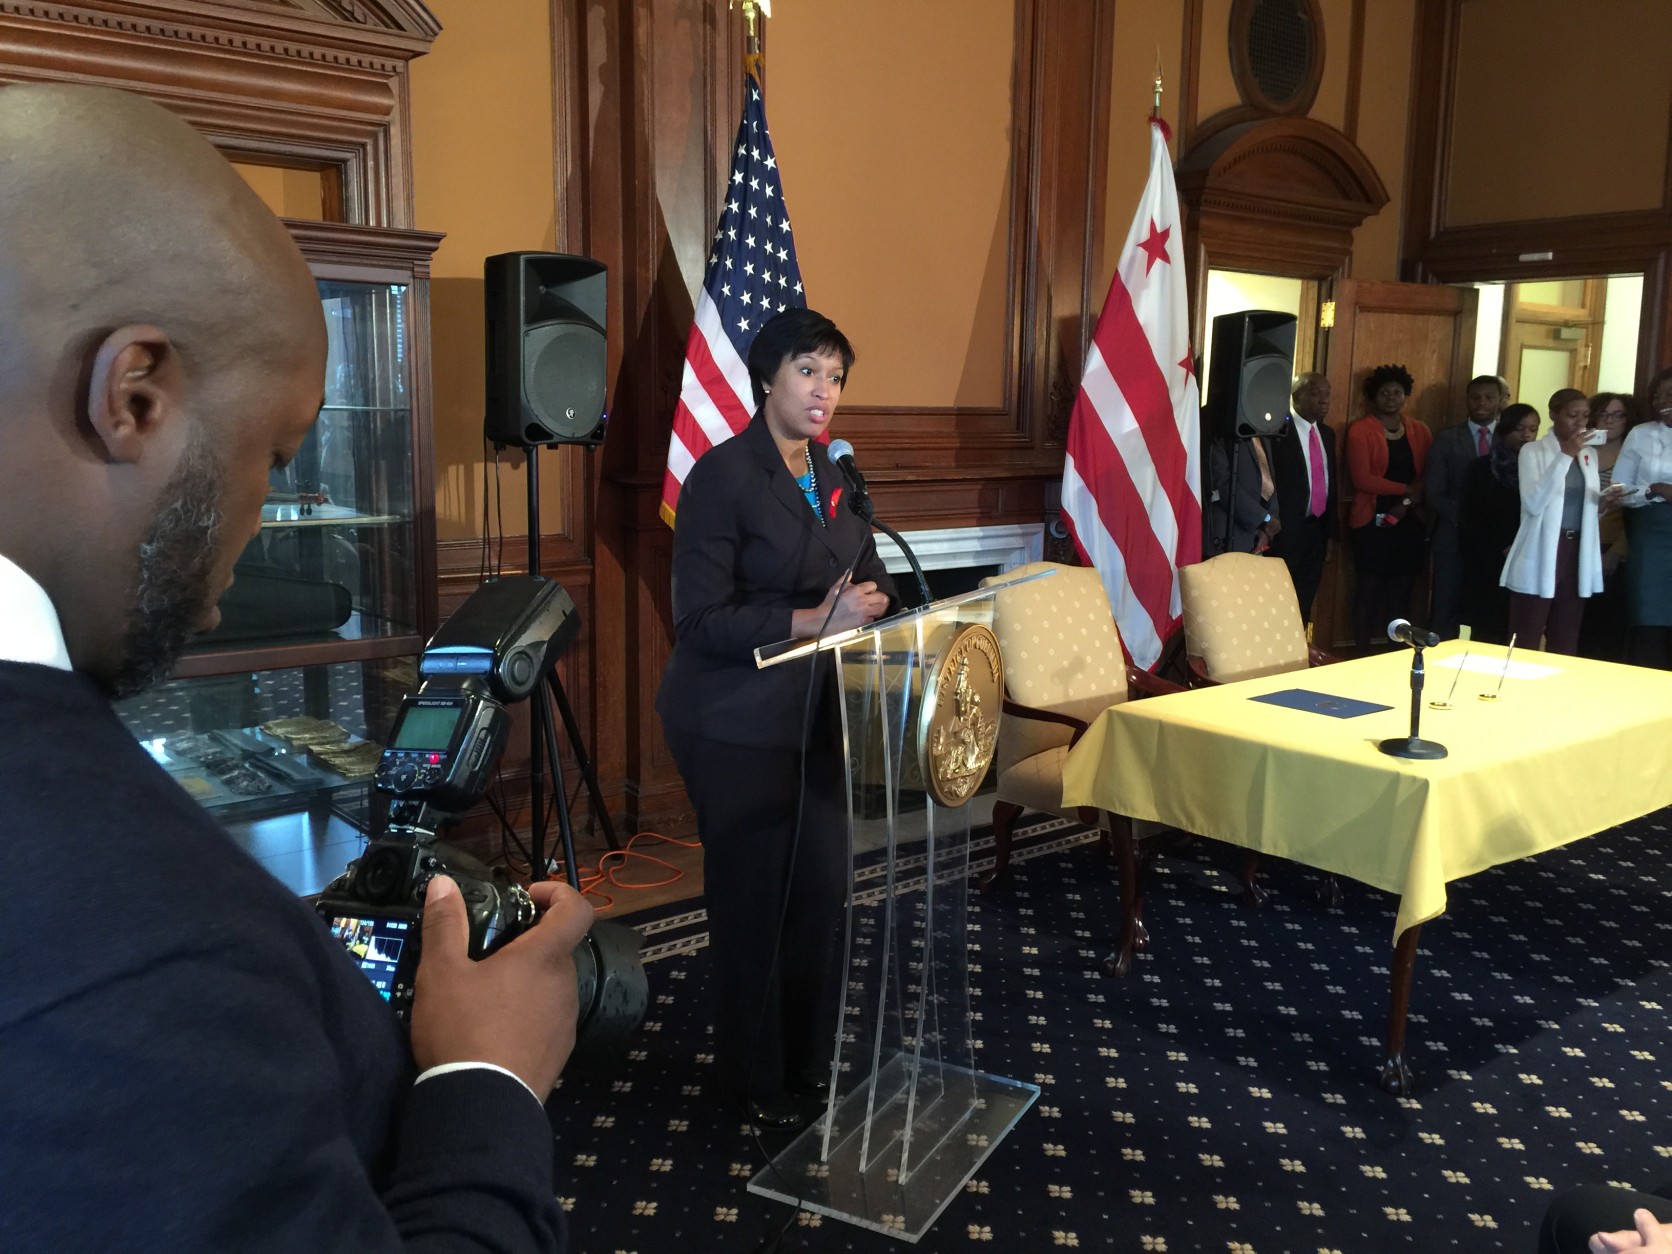 "In 2013, there were no babies born with HIV [in D.C.] and that's a good thing," Mayor Muriel Bowser said at Tuesday’s signing ceremony. The proclamation Bowser signed says the city has a goal of decreasing new HIV cases by 50 percent by 2020. (WTOP/Kristi King)